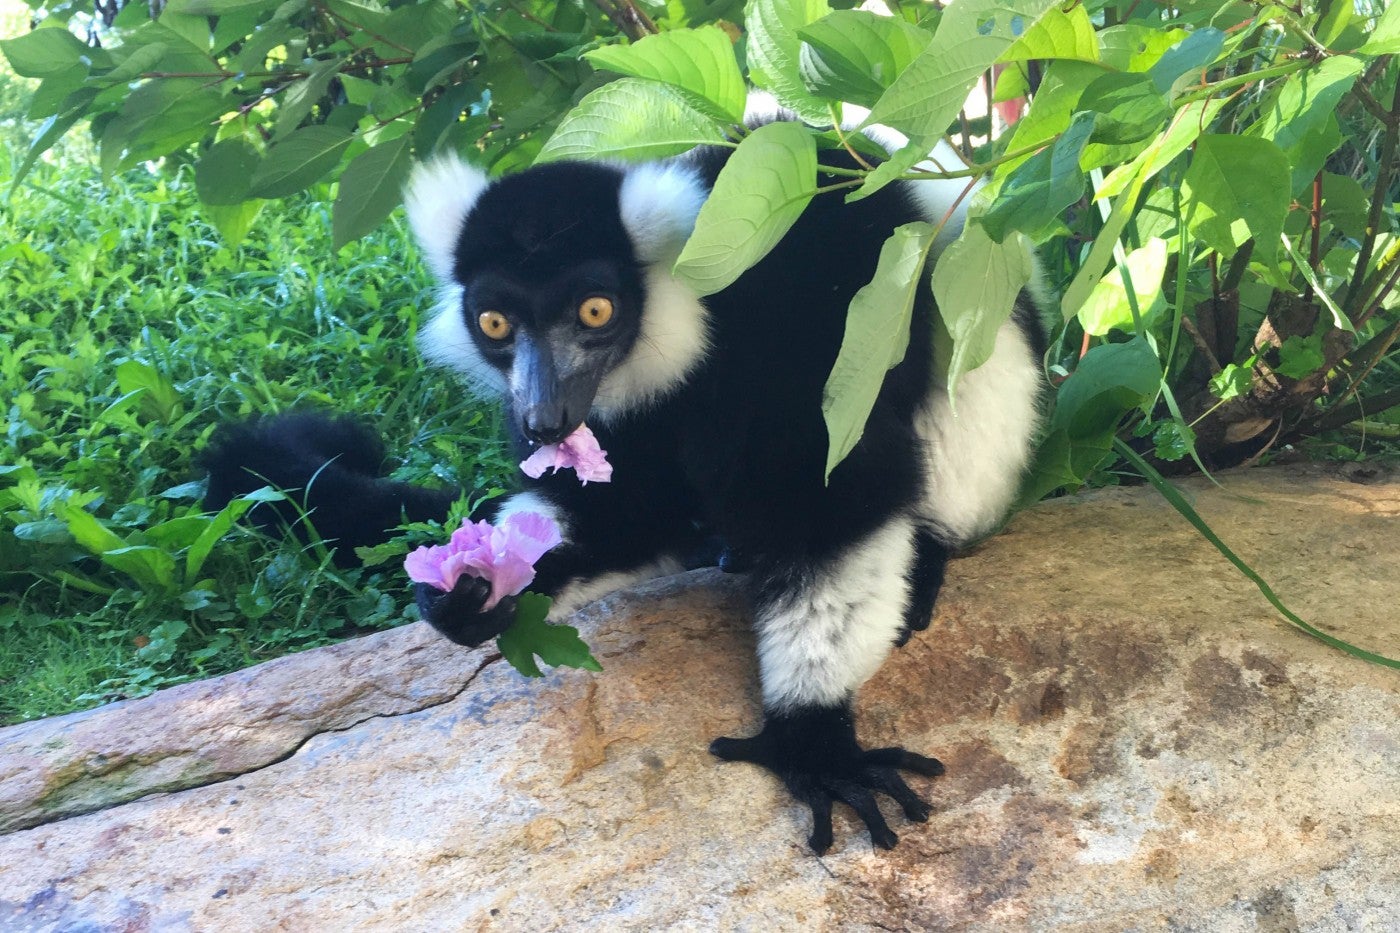 Black-and-white ruffed lemur Aloke sits atop a log eating a pink hibiscus flower.